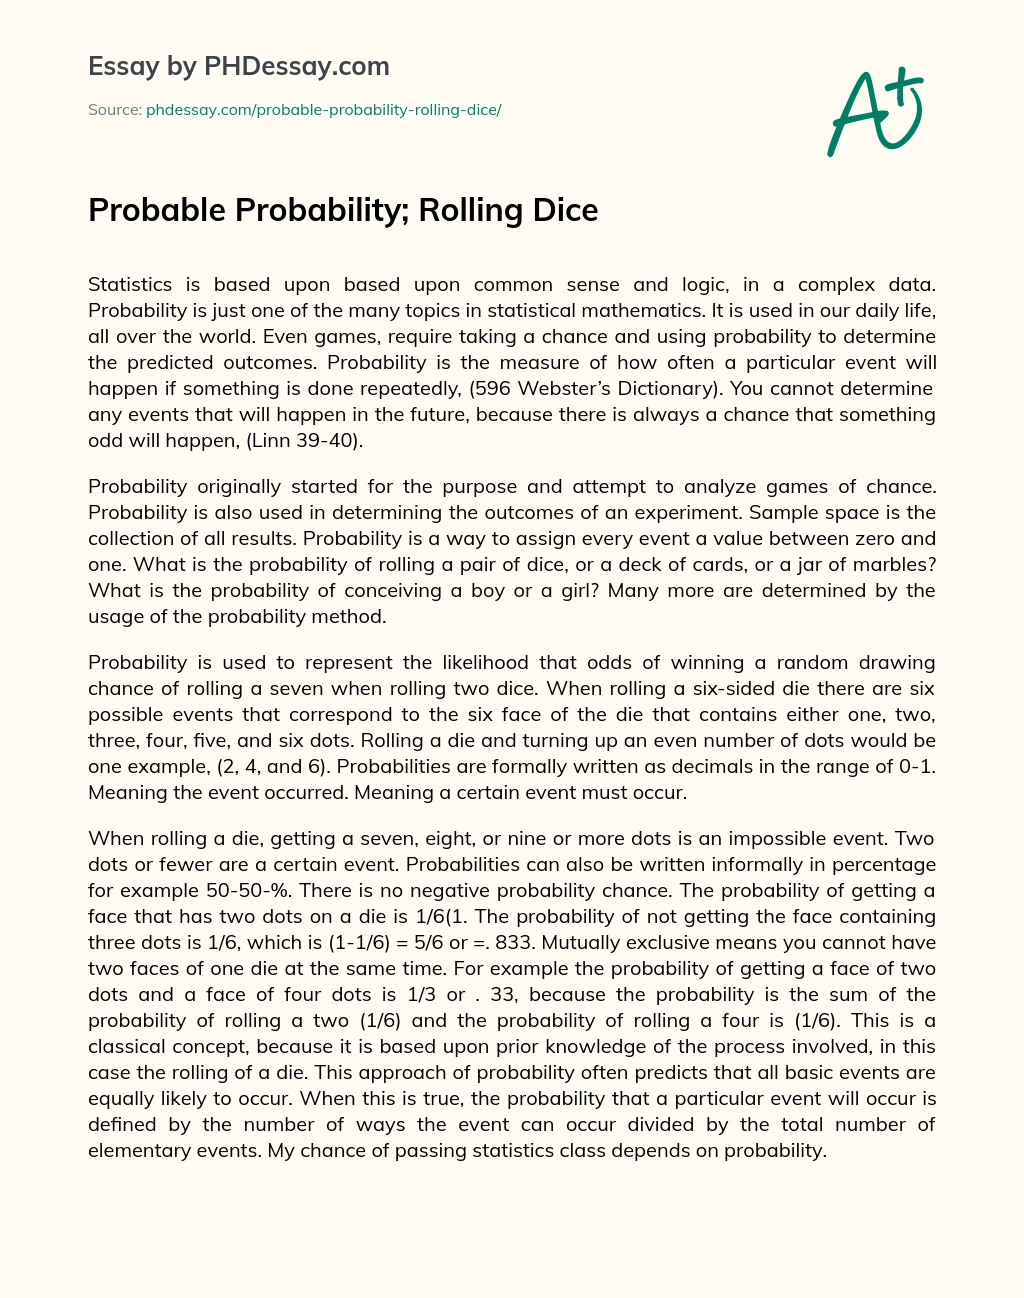 Probable Probability; Rolling Dice essay